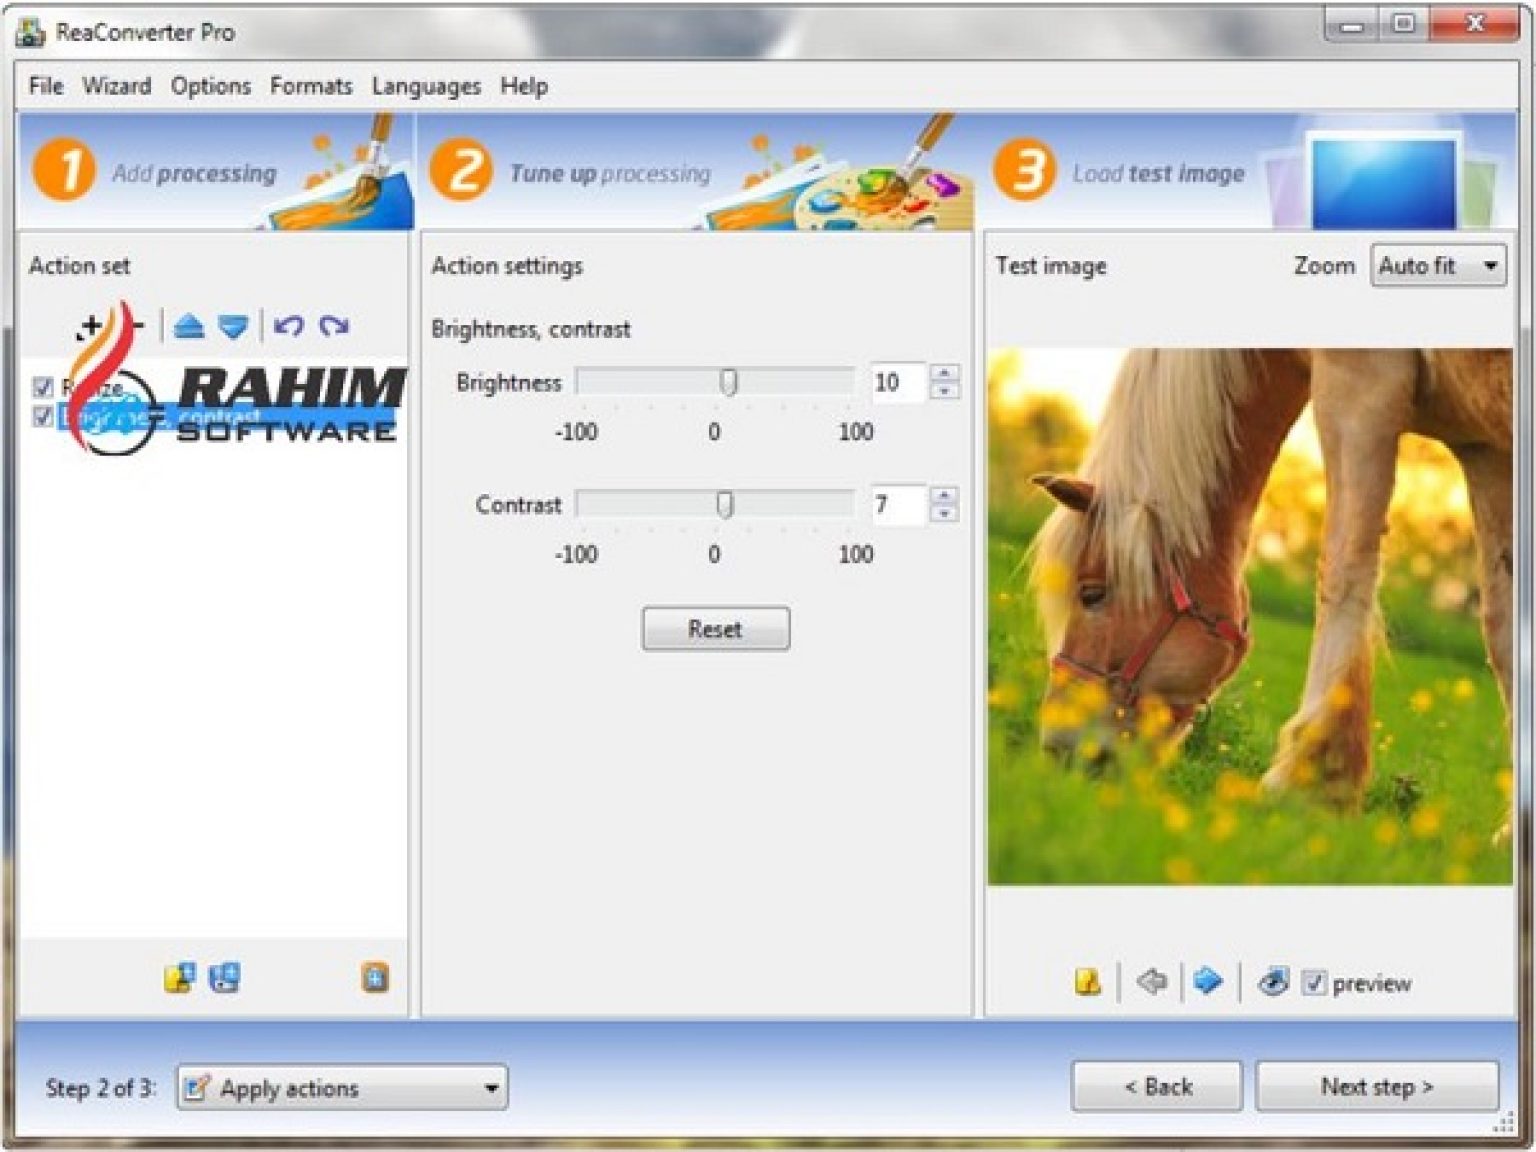 download the last version for android reaConverter Pro 7.792